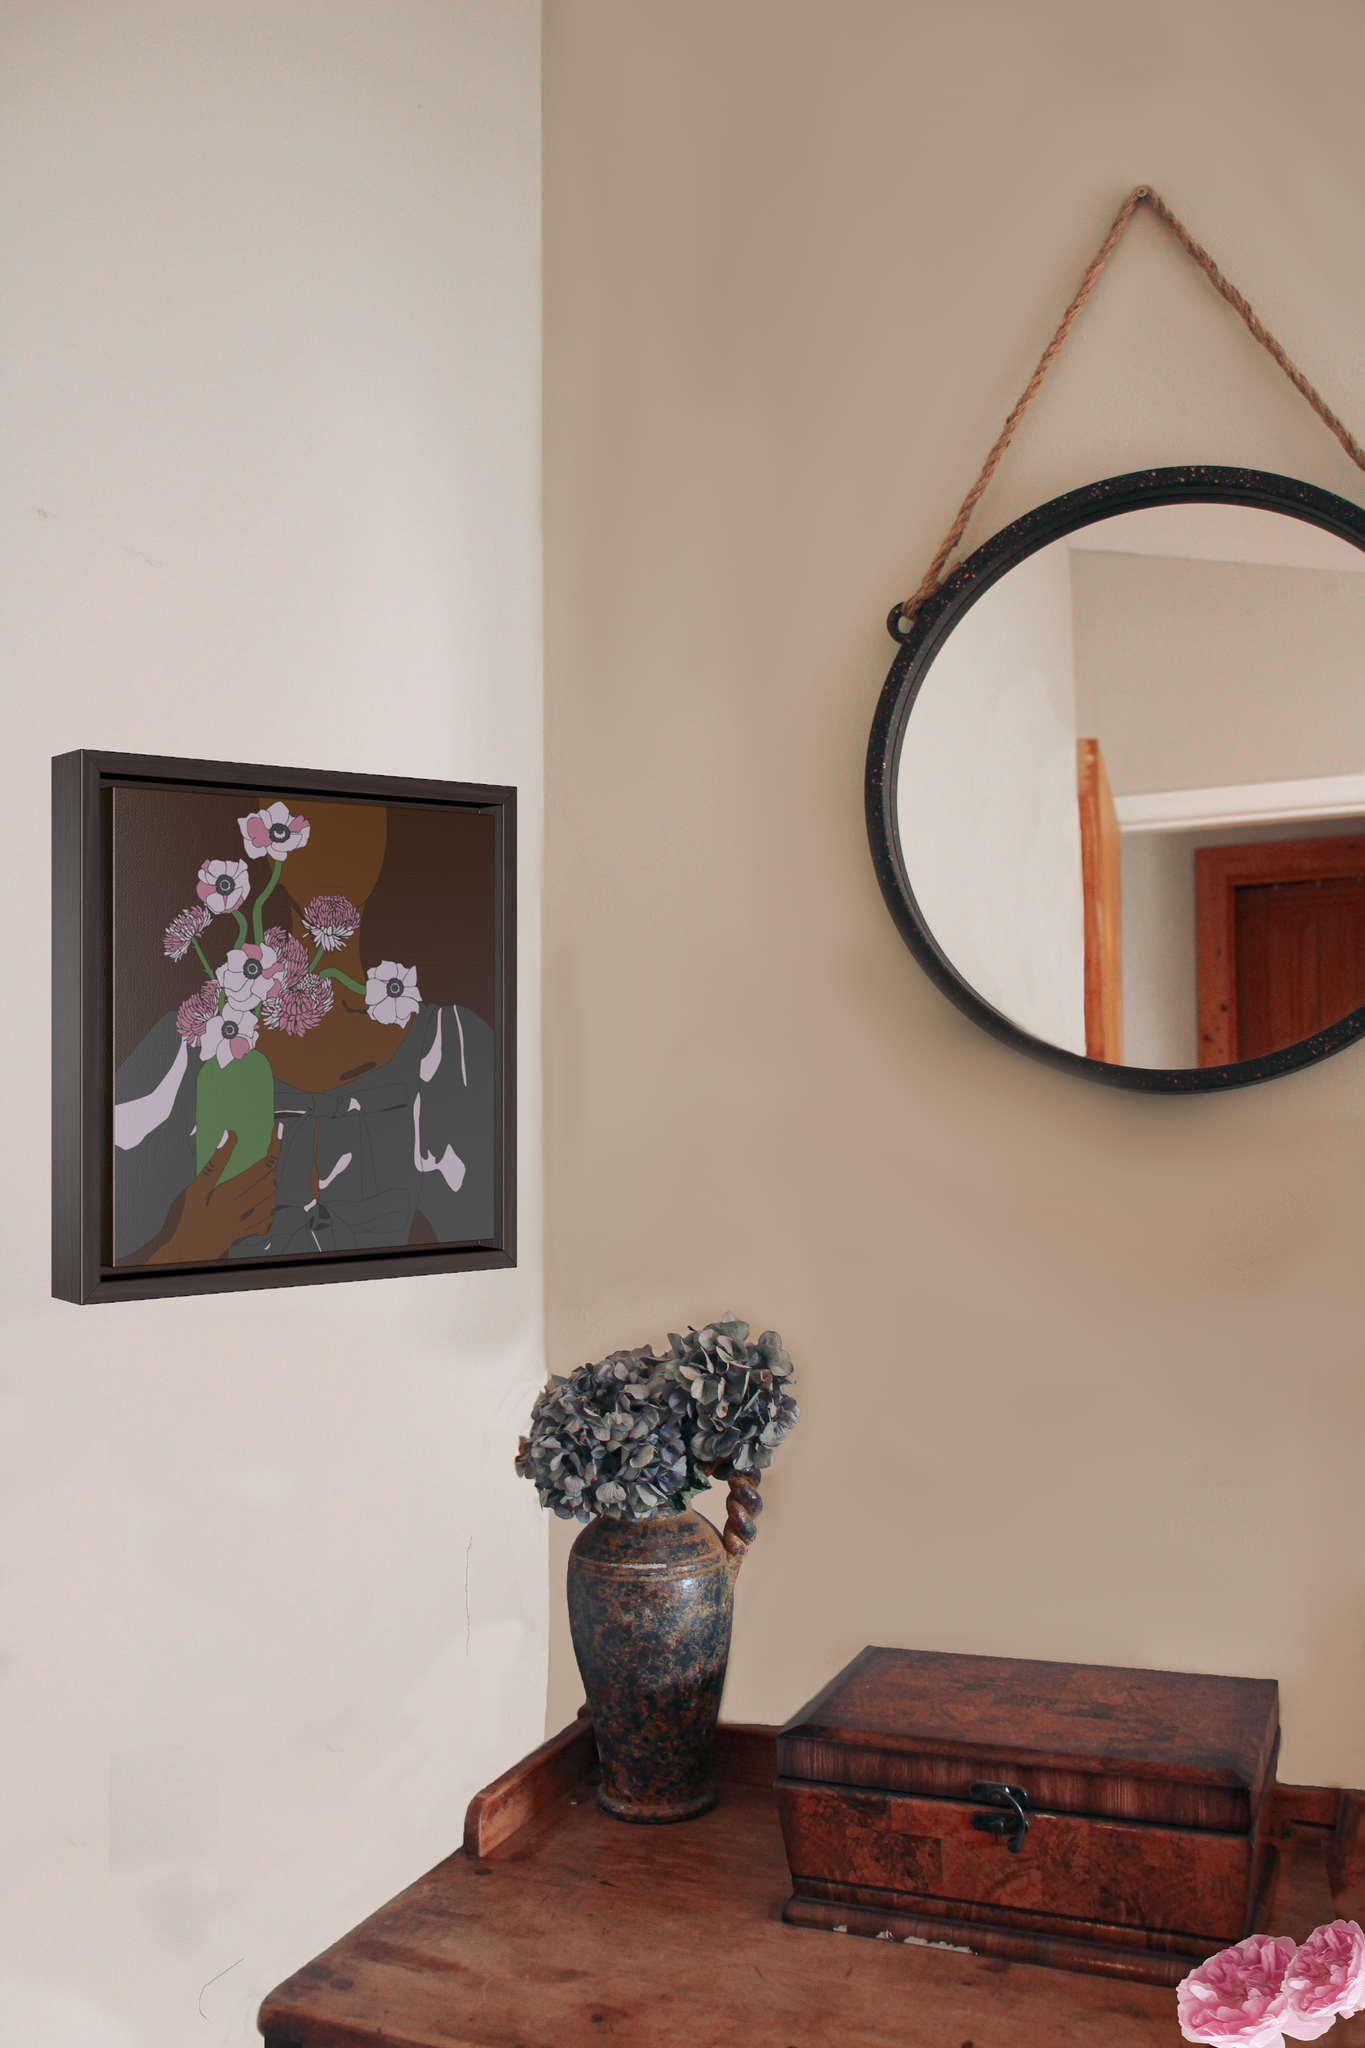 A framed canvas illustration of a portrait of a Black woman holding a vase of flowers, hanging on a wall next to a wood desk and a hanging circle mirror